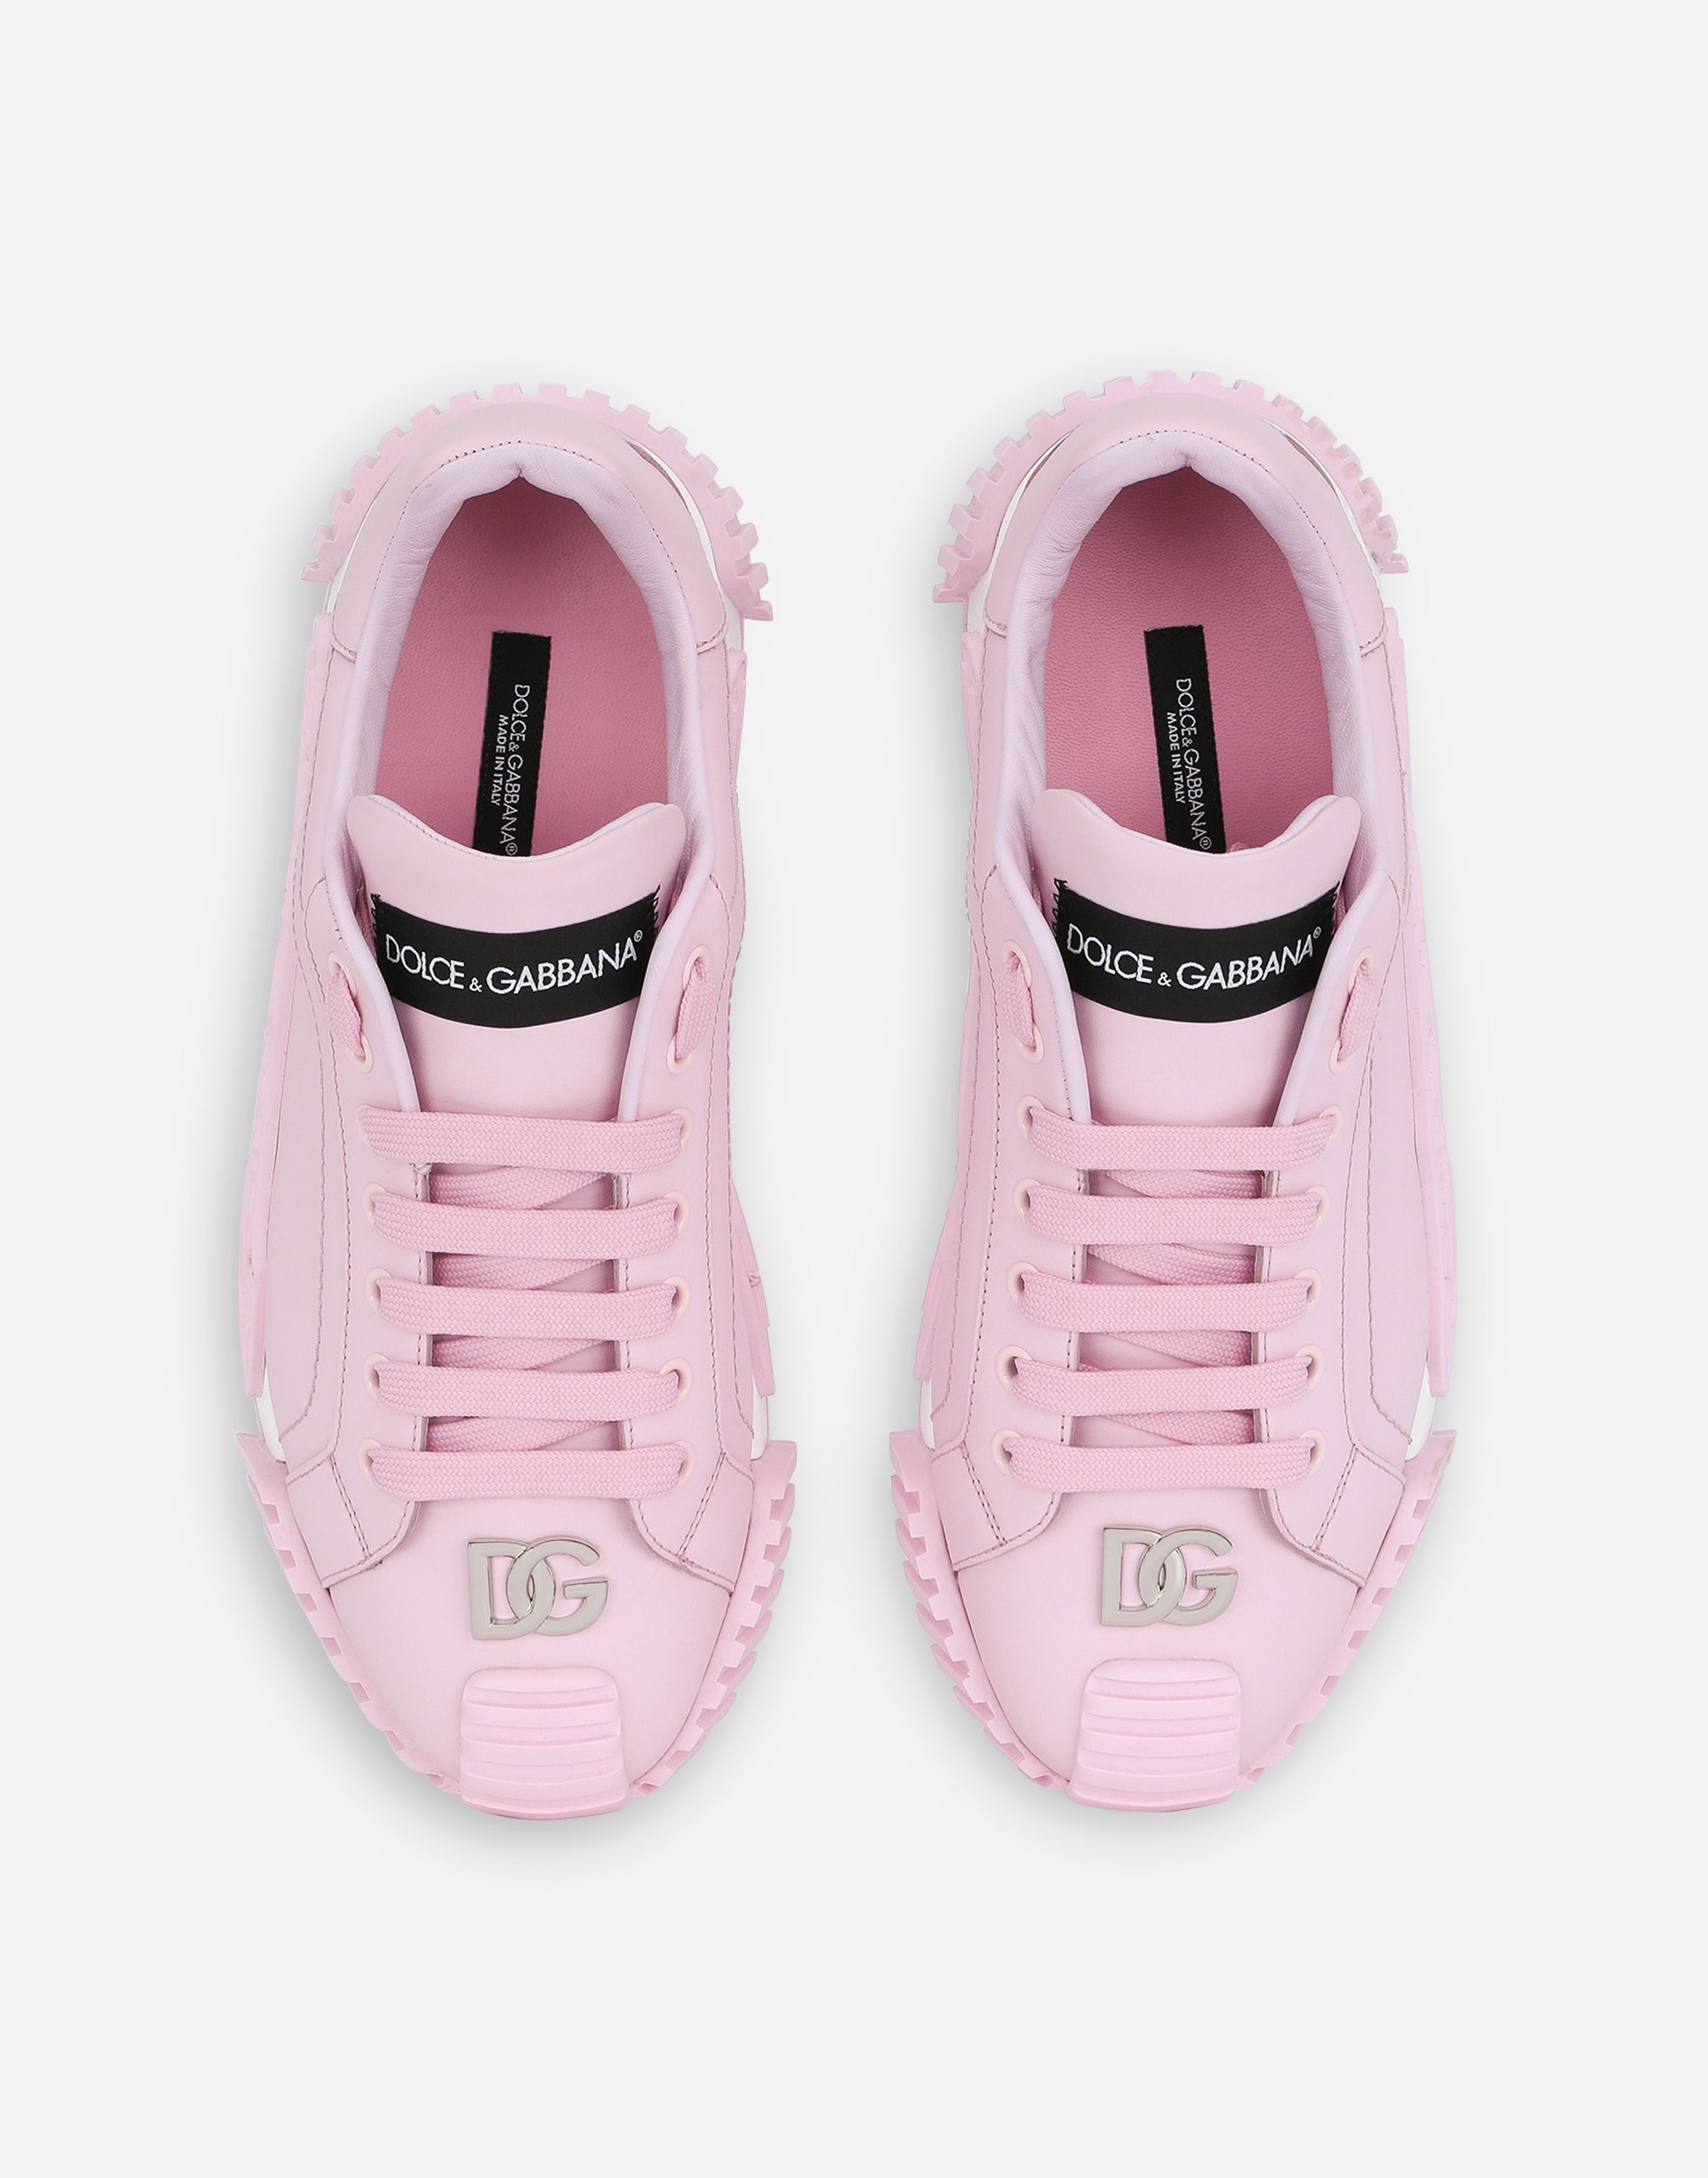 Calfskin NS1 sneakers with DG logo in Pink for Women | Dolce&Gabbana®